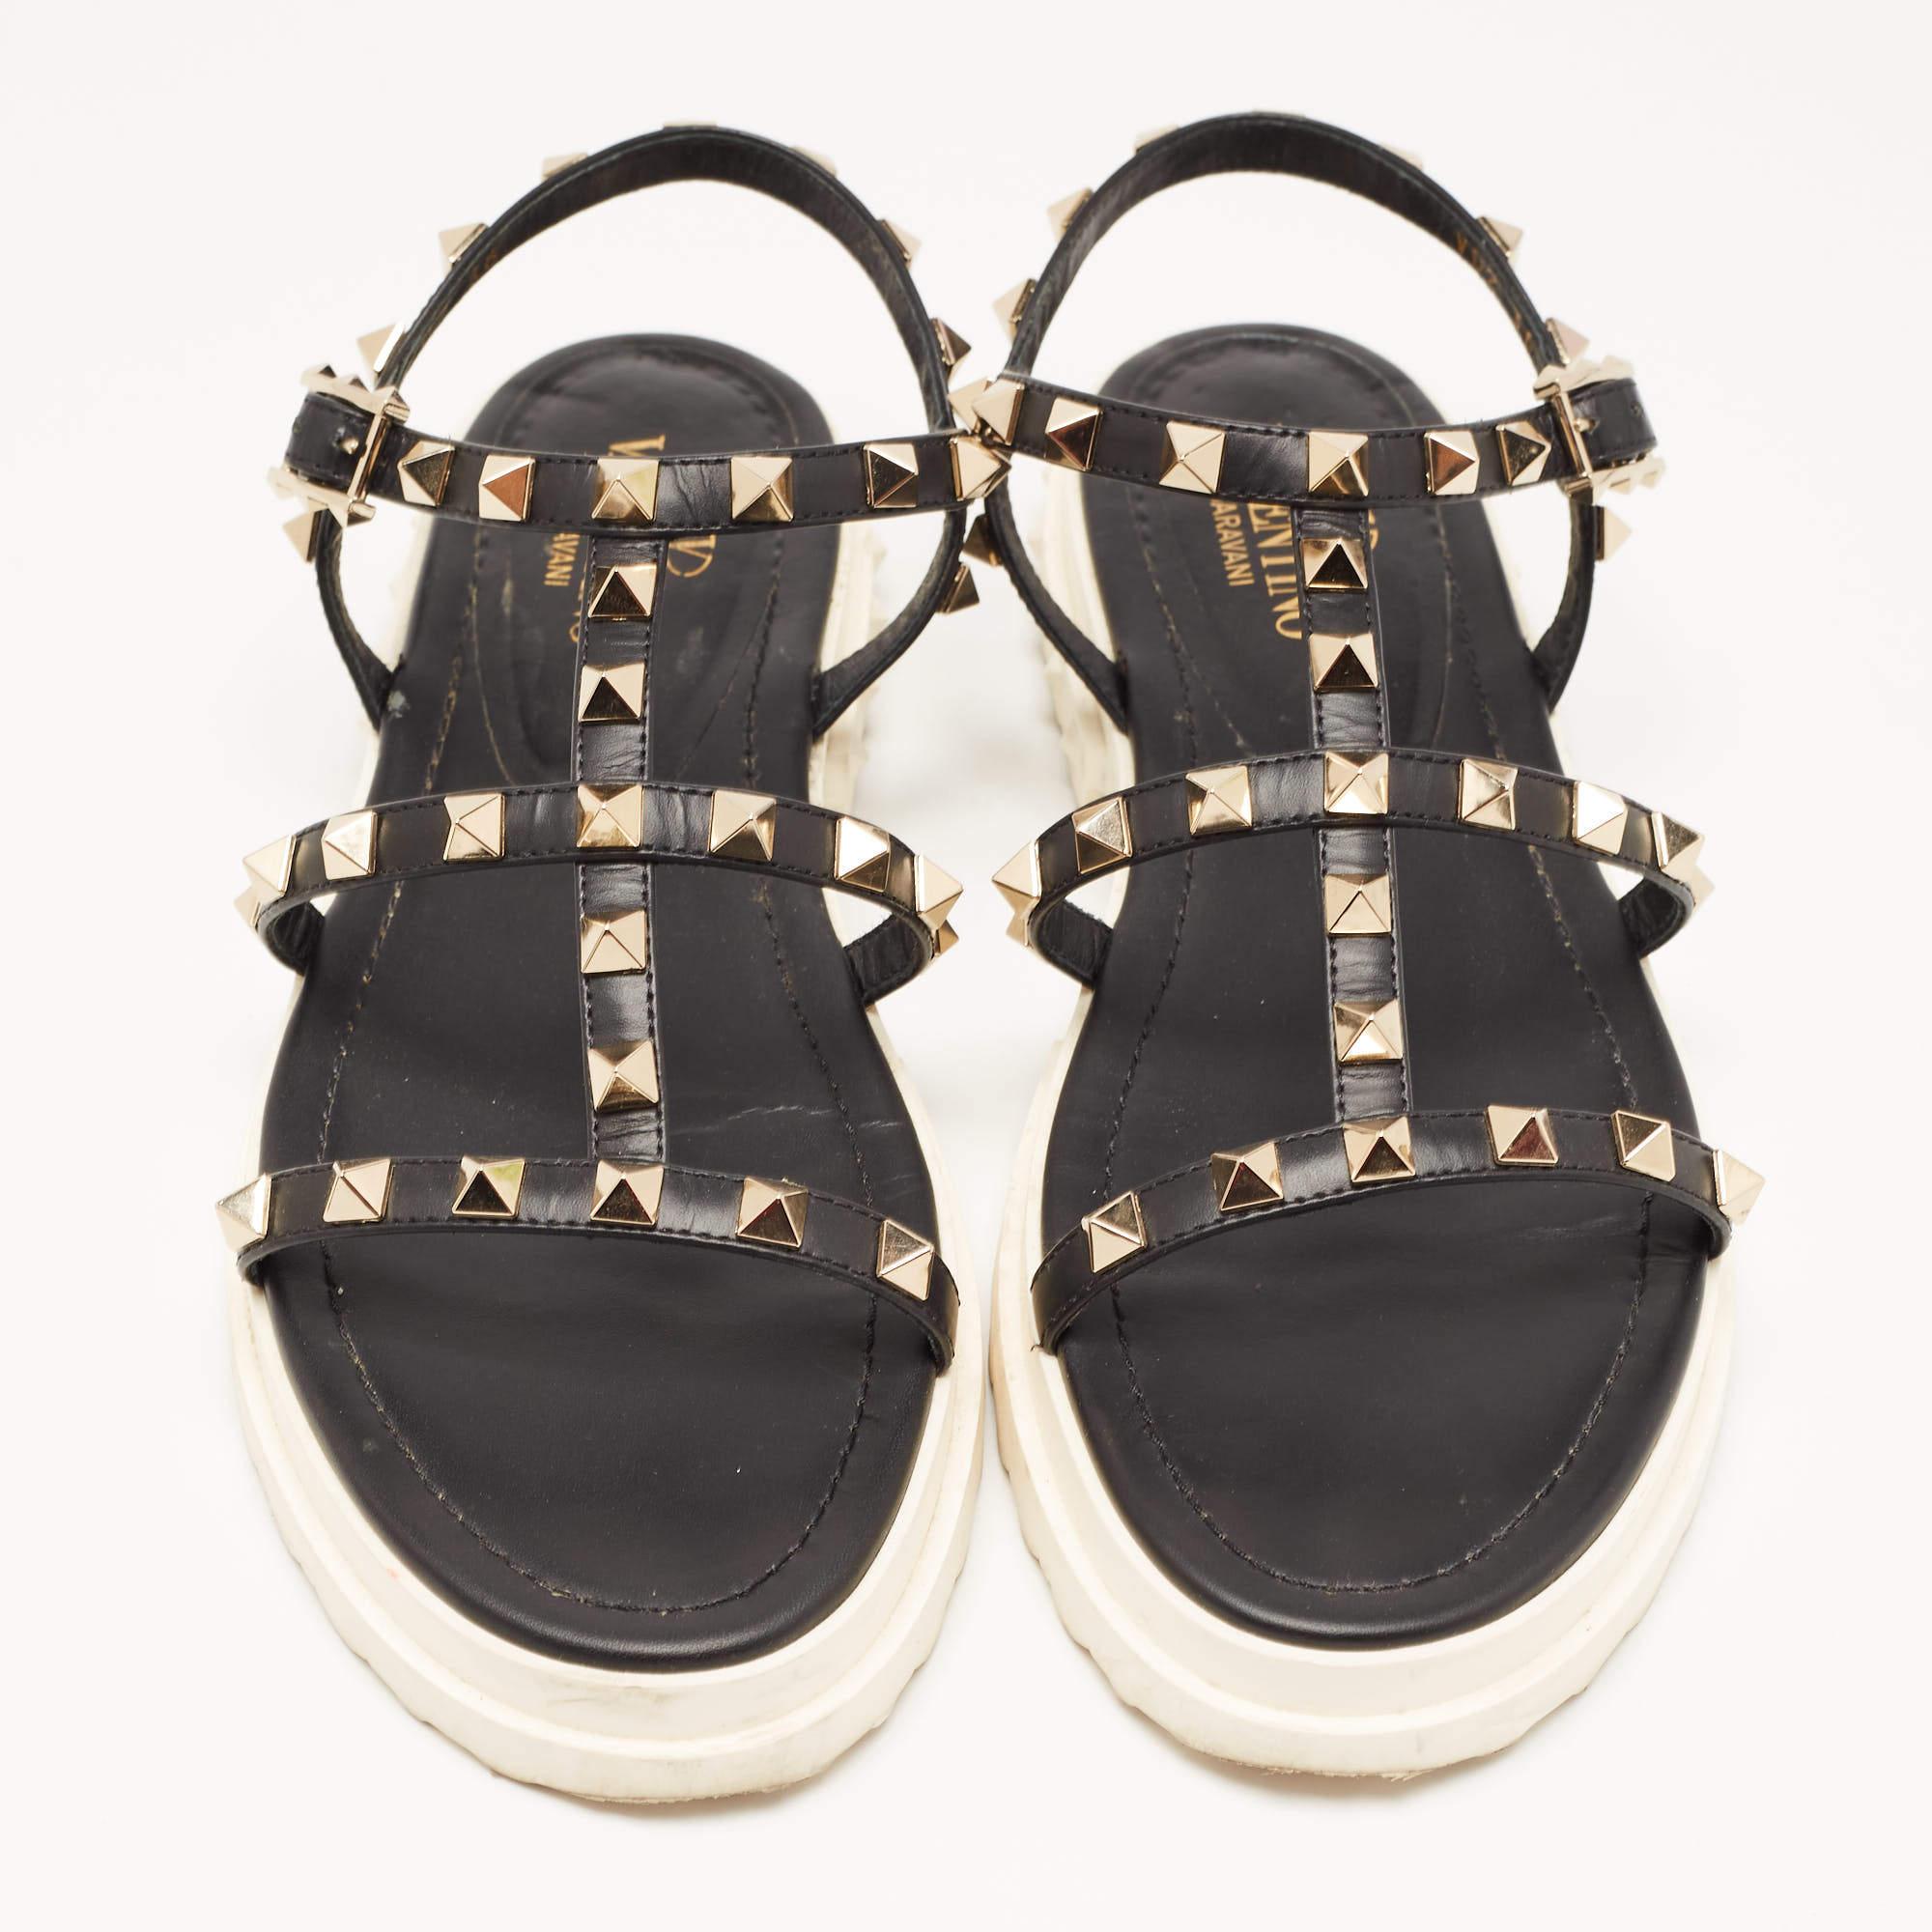 Valentino Black Leather Studded Accents Gladiator Sandals Size 36 3